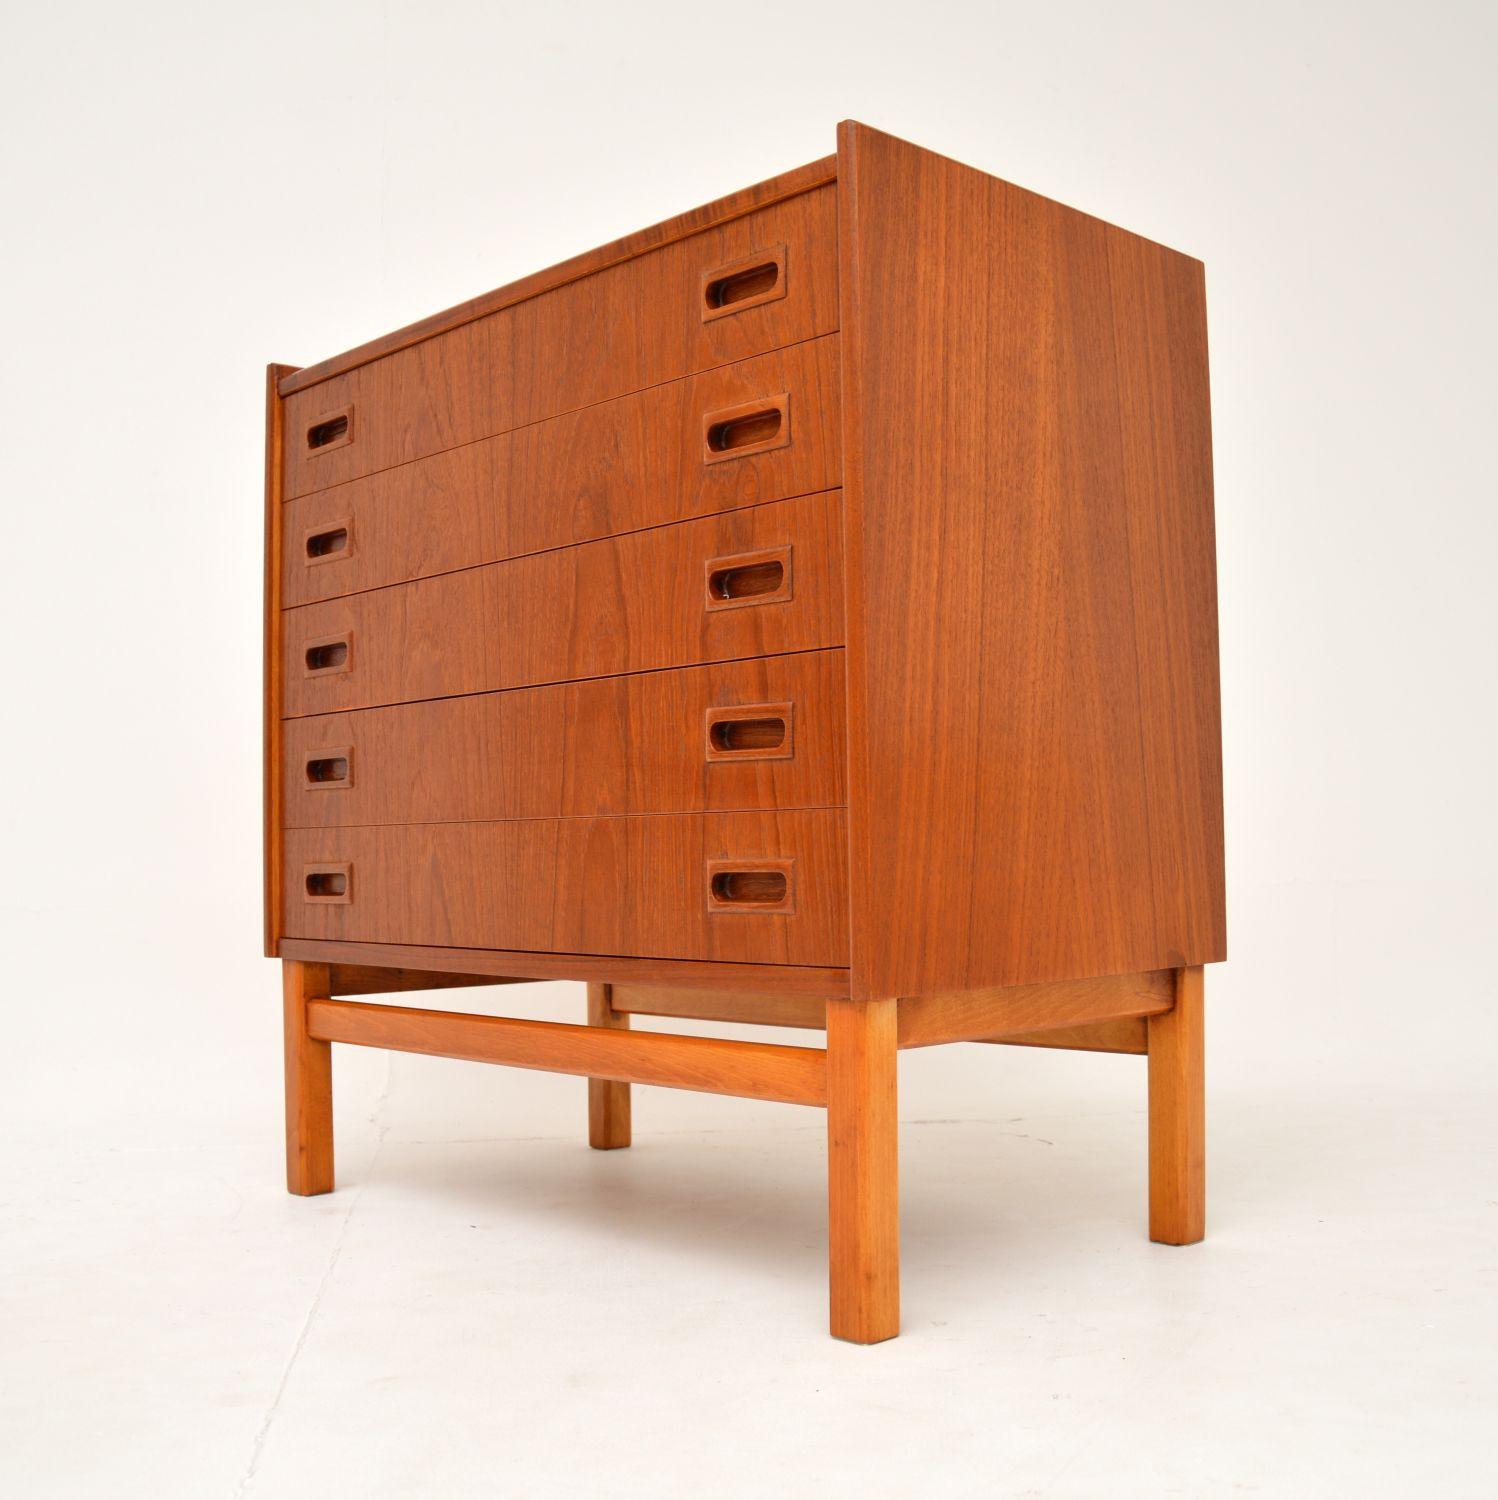 1960's Danish Teak Vintage Chest of Drawers In Good Condition For Sale In London, GB